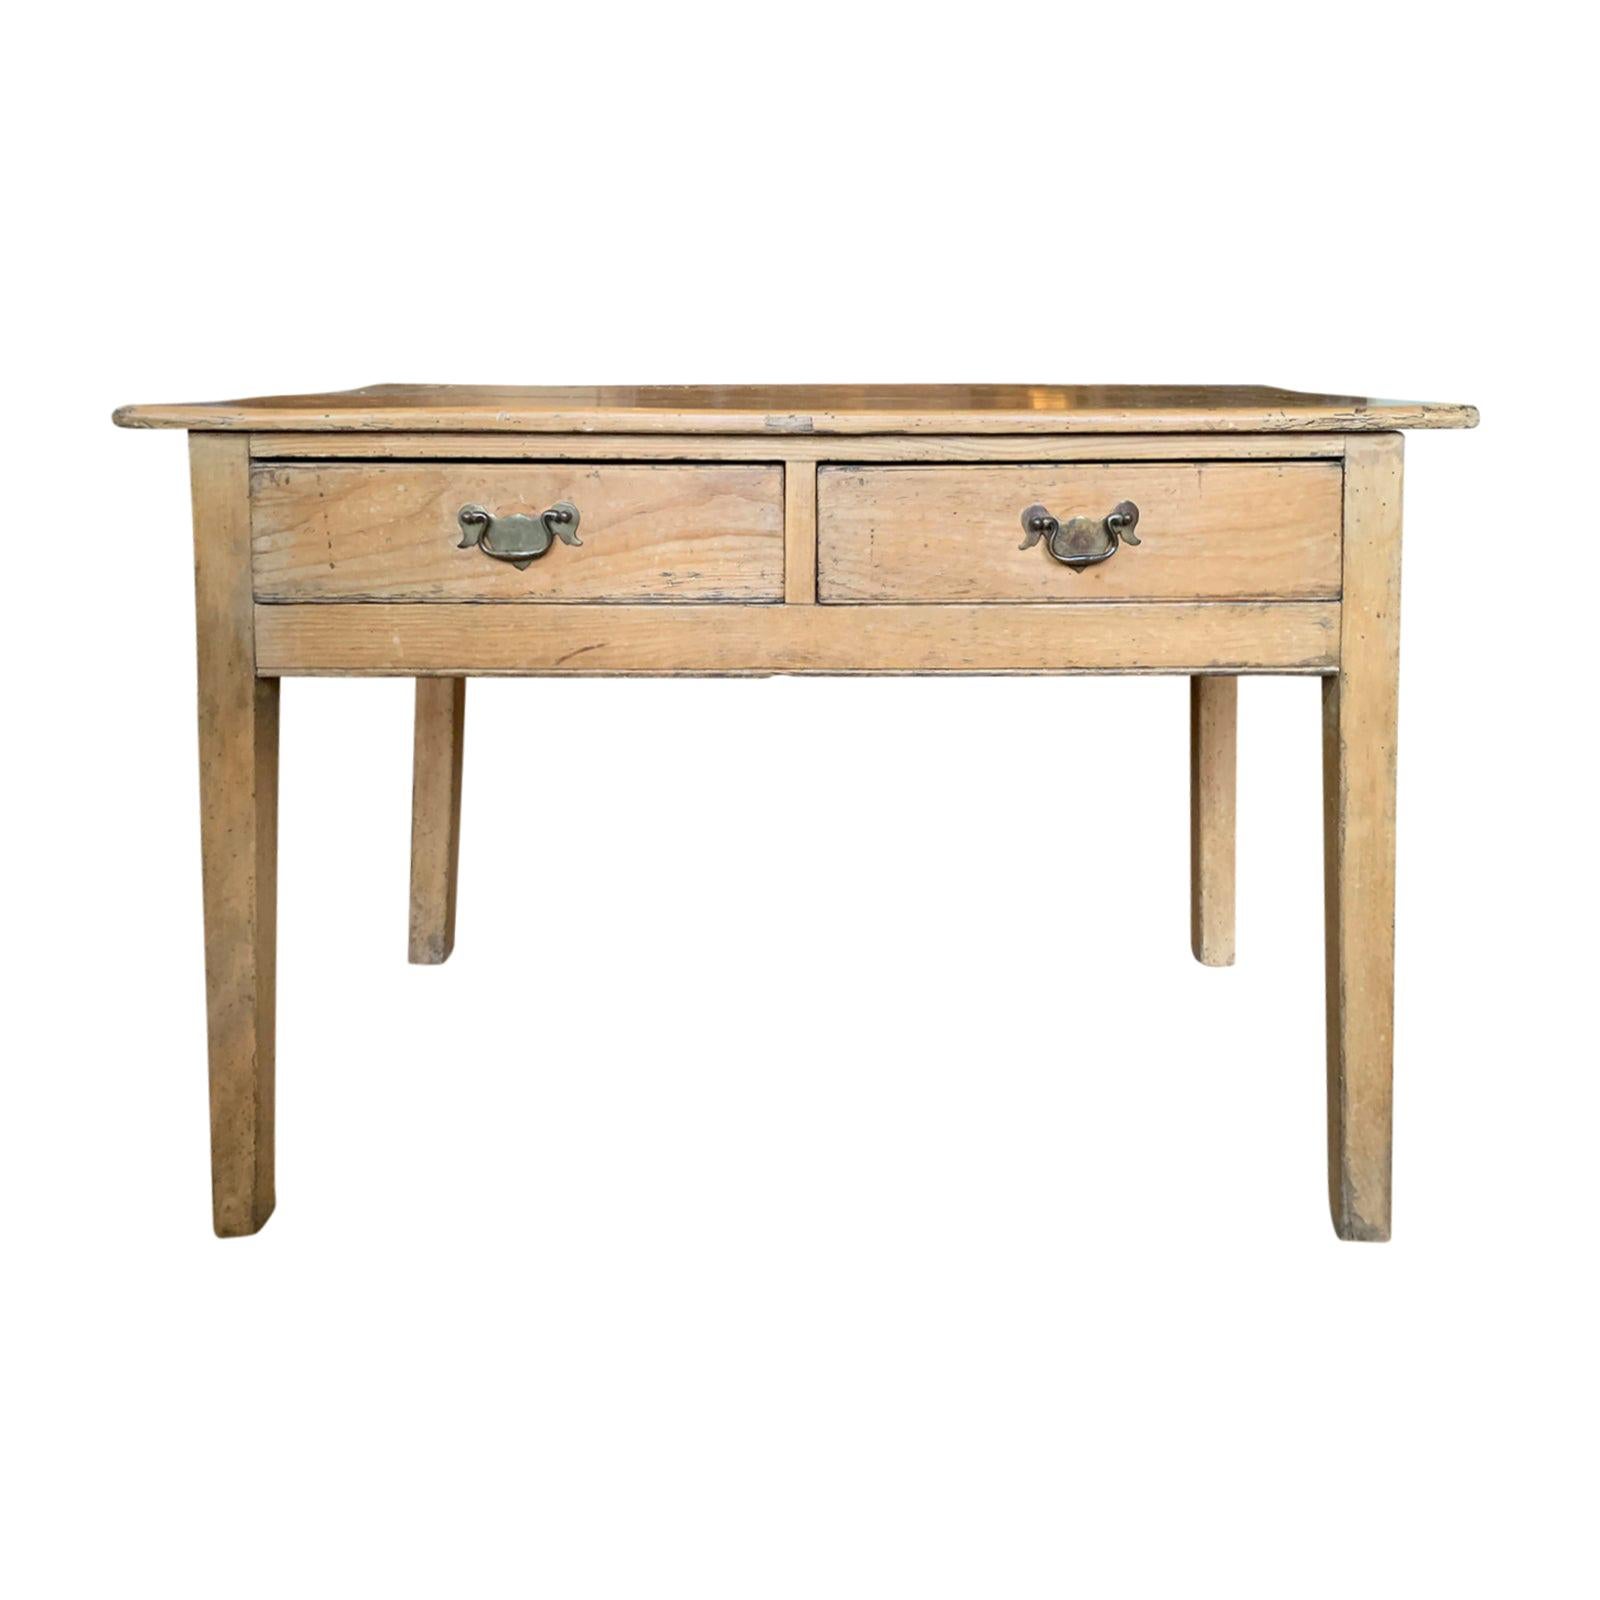 19th Century Regency Pine Table, Two Drawers